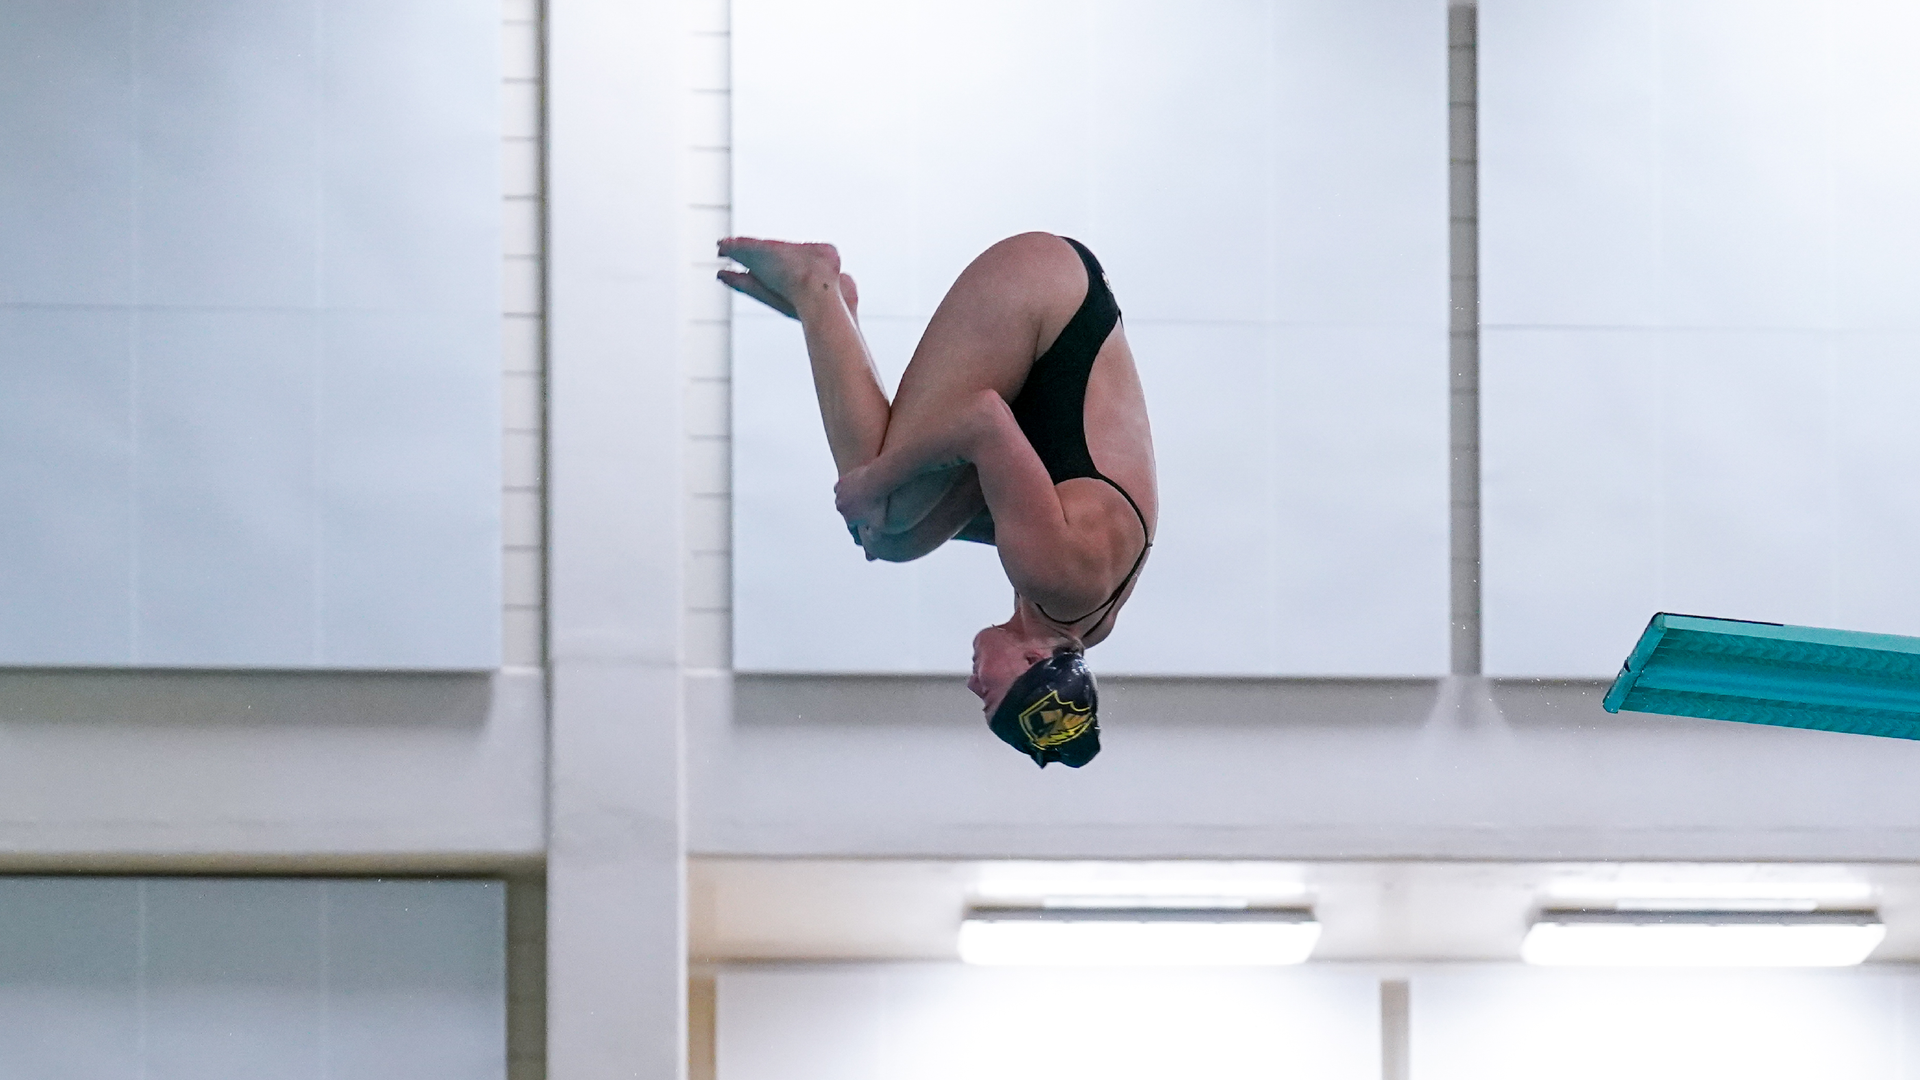 Abbi Priestley won the 1- (251.77) and 3-meter (279.00) diving events against Carroll University